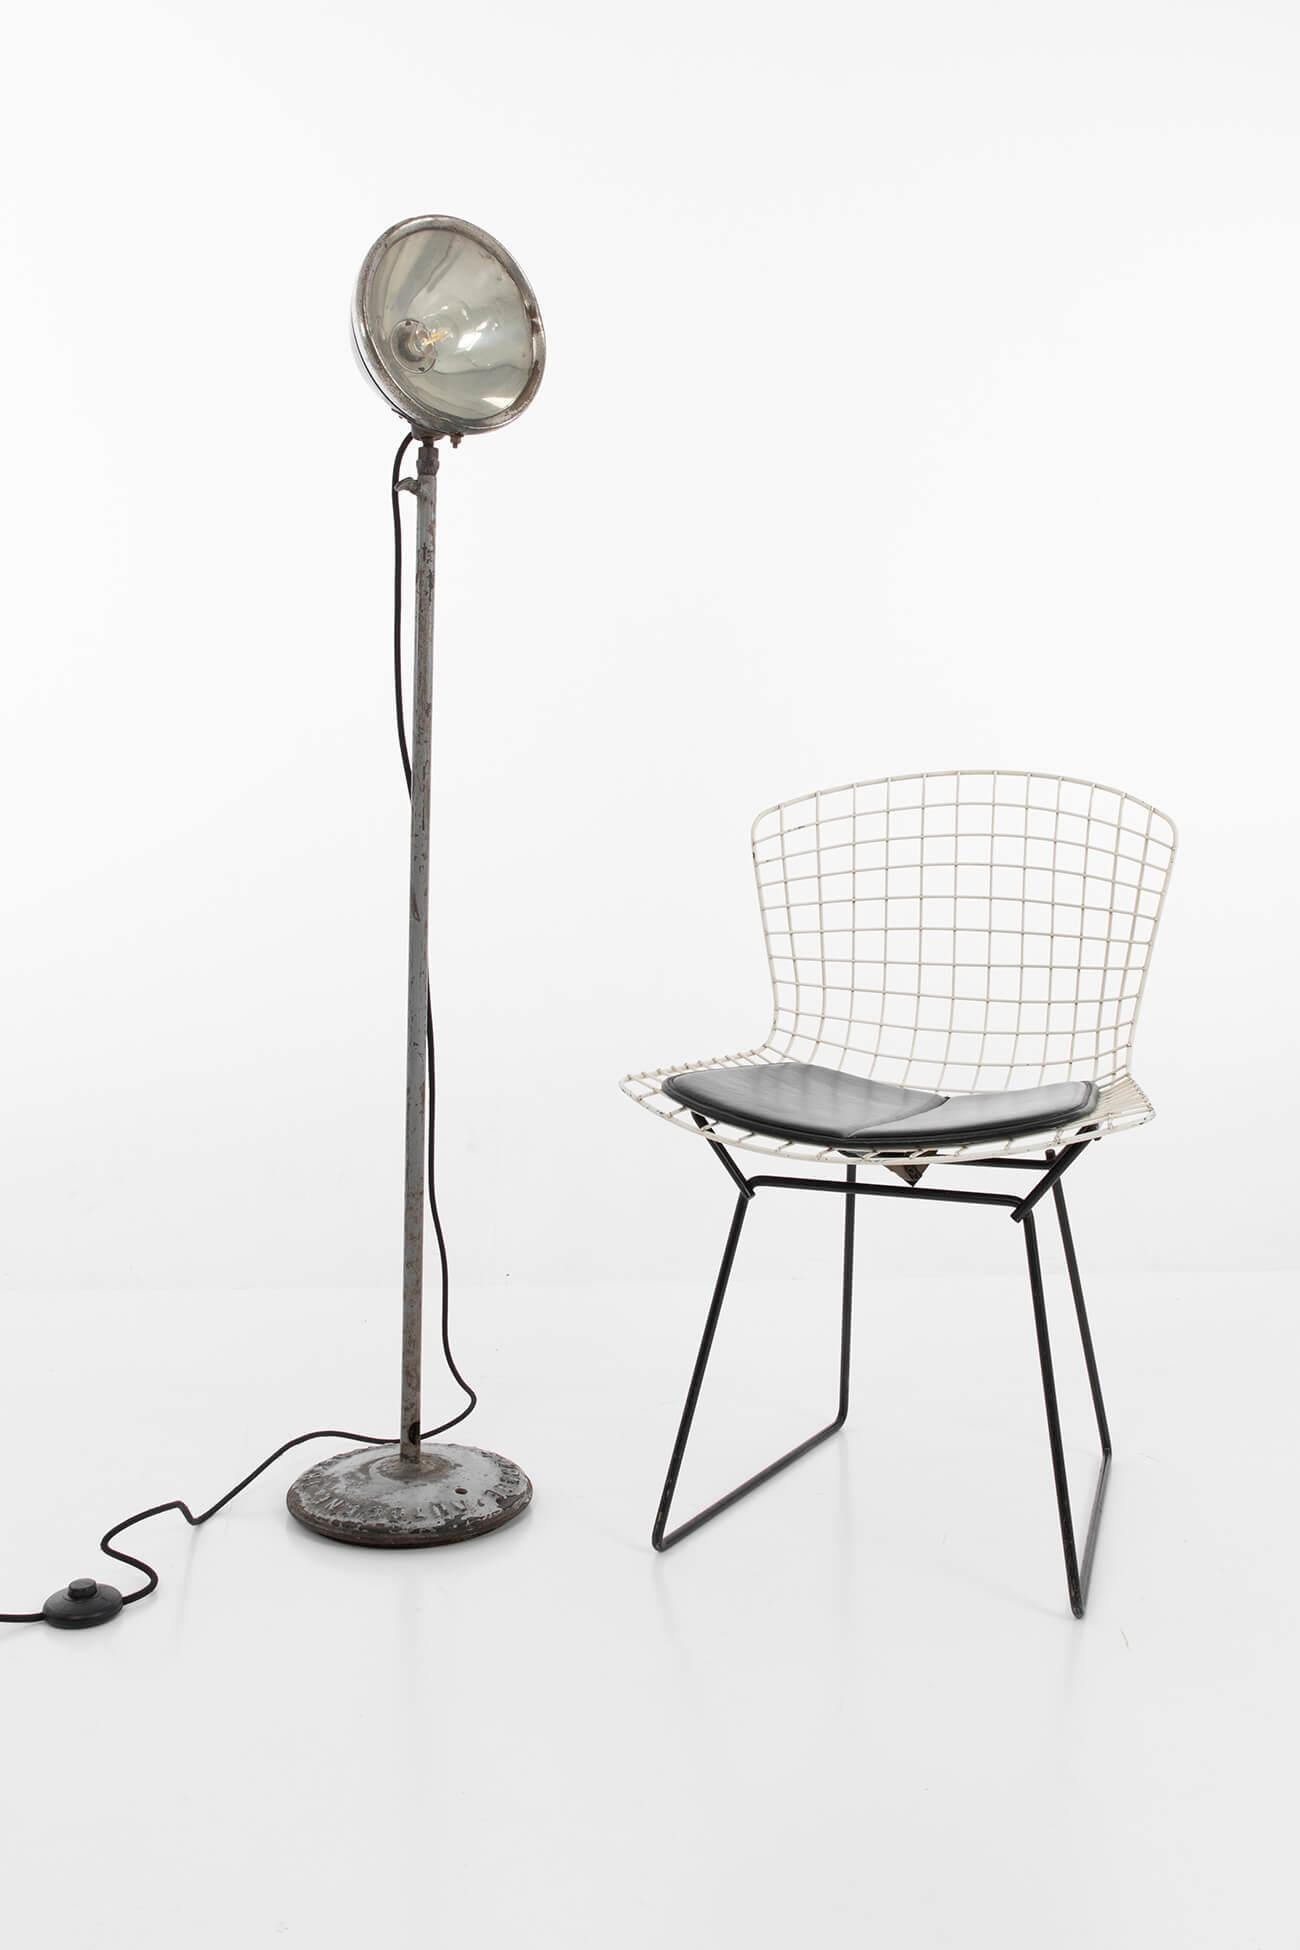 Industrial French Floor Lamp, circa 1950s For Sale 2